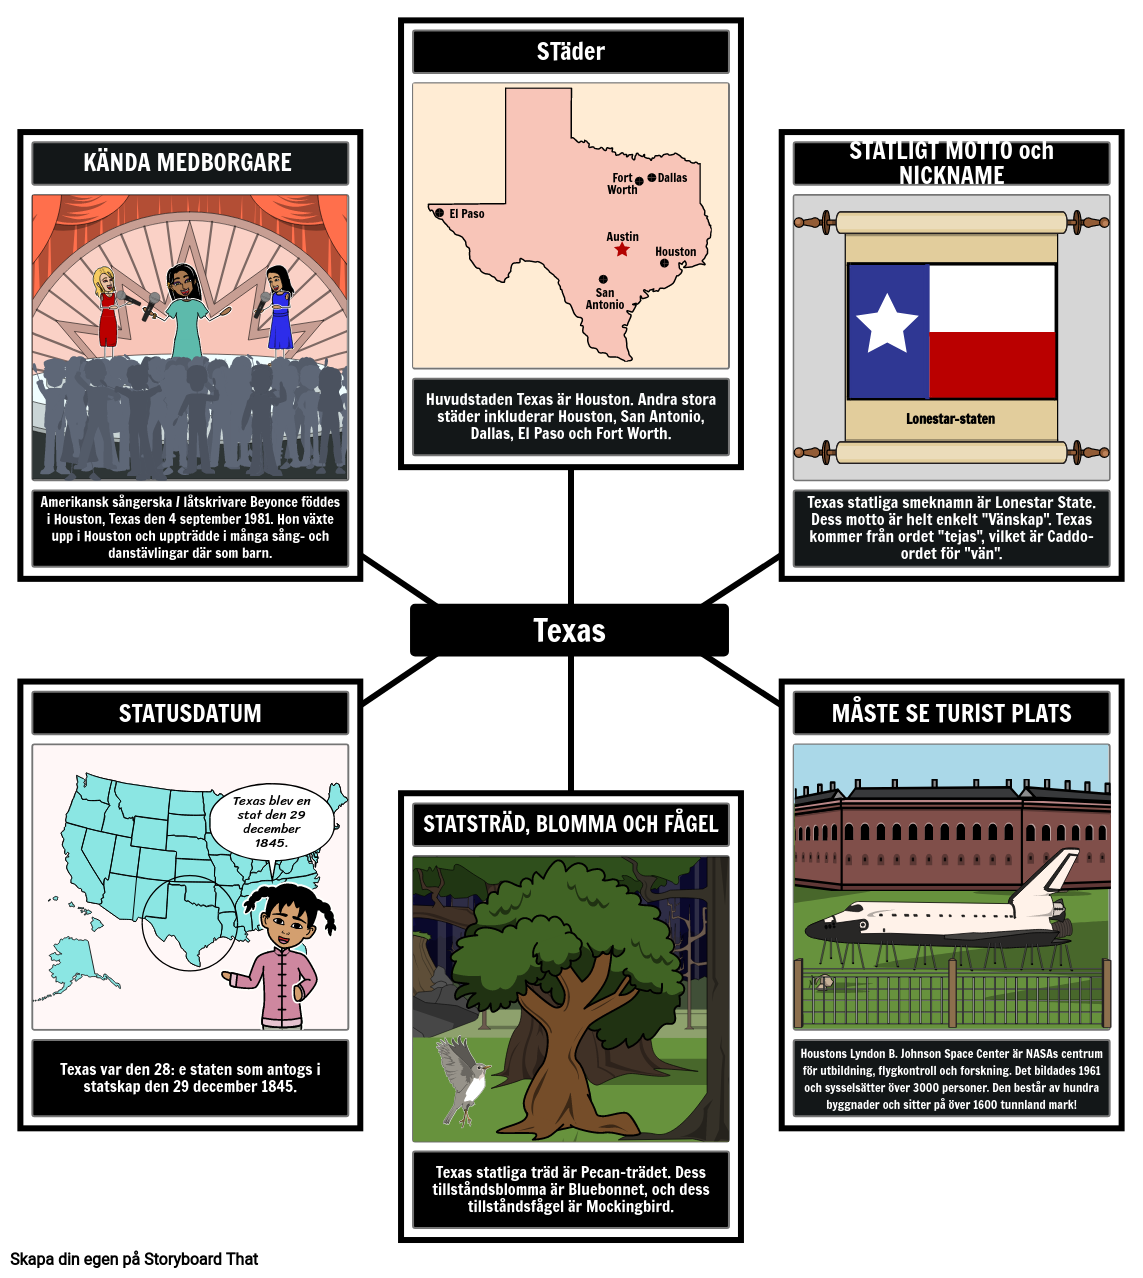 Texas State Information